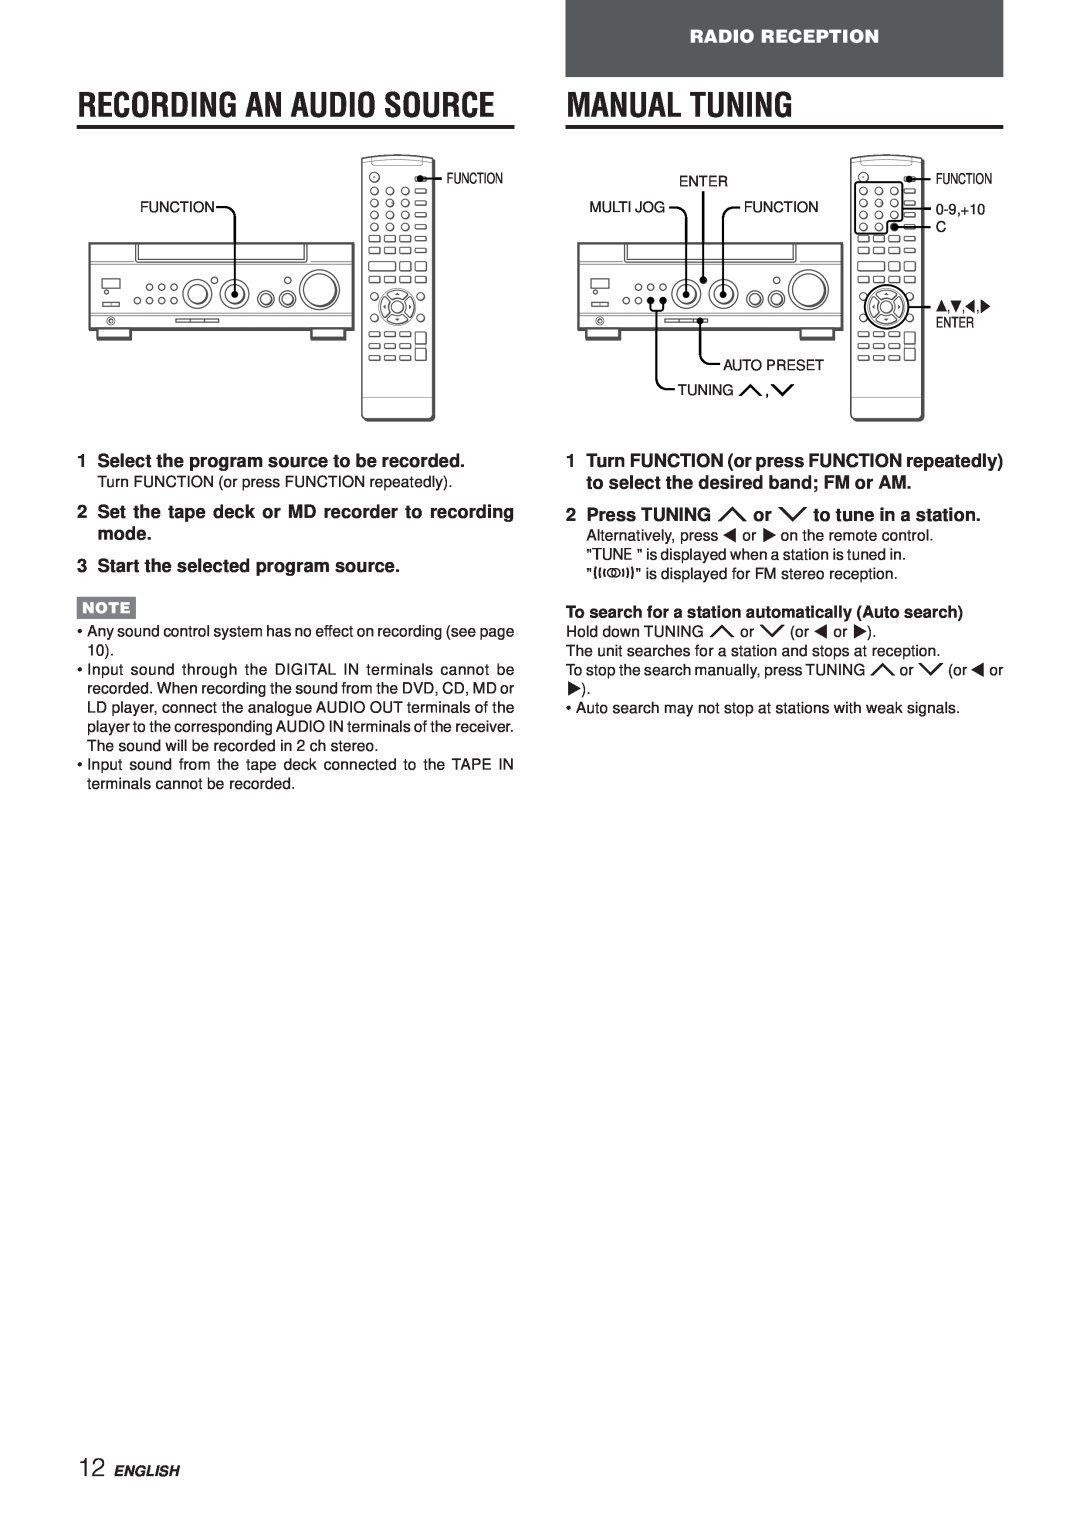 Aiwa AV-NW50 Manual Tuning, Recording An Audio Source, Radio Reception, Select the program source to be recorded, i,k,j,l 